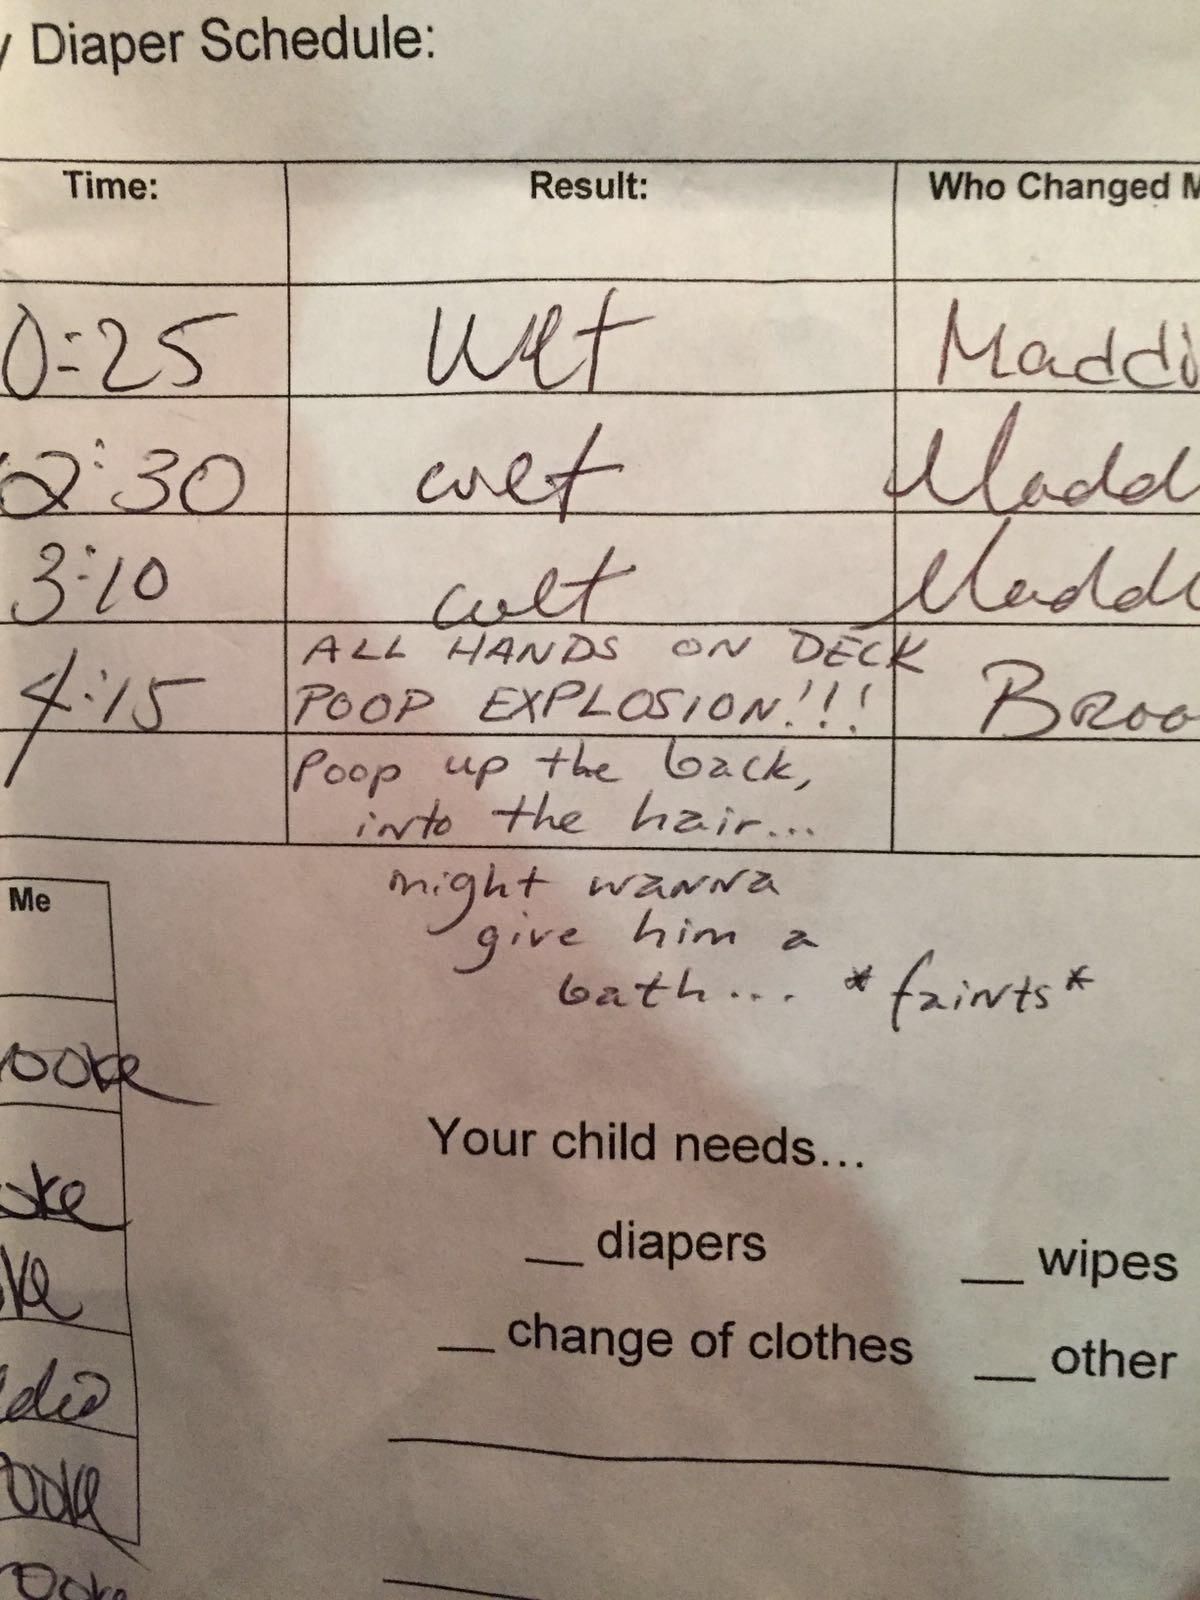 My friend’s kid’s diaper report from daycare ... *faints*